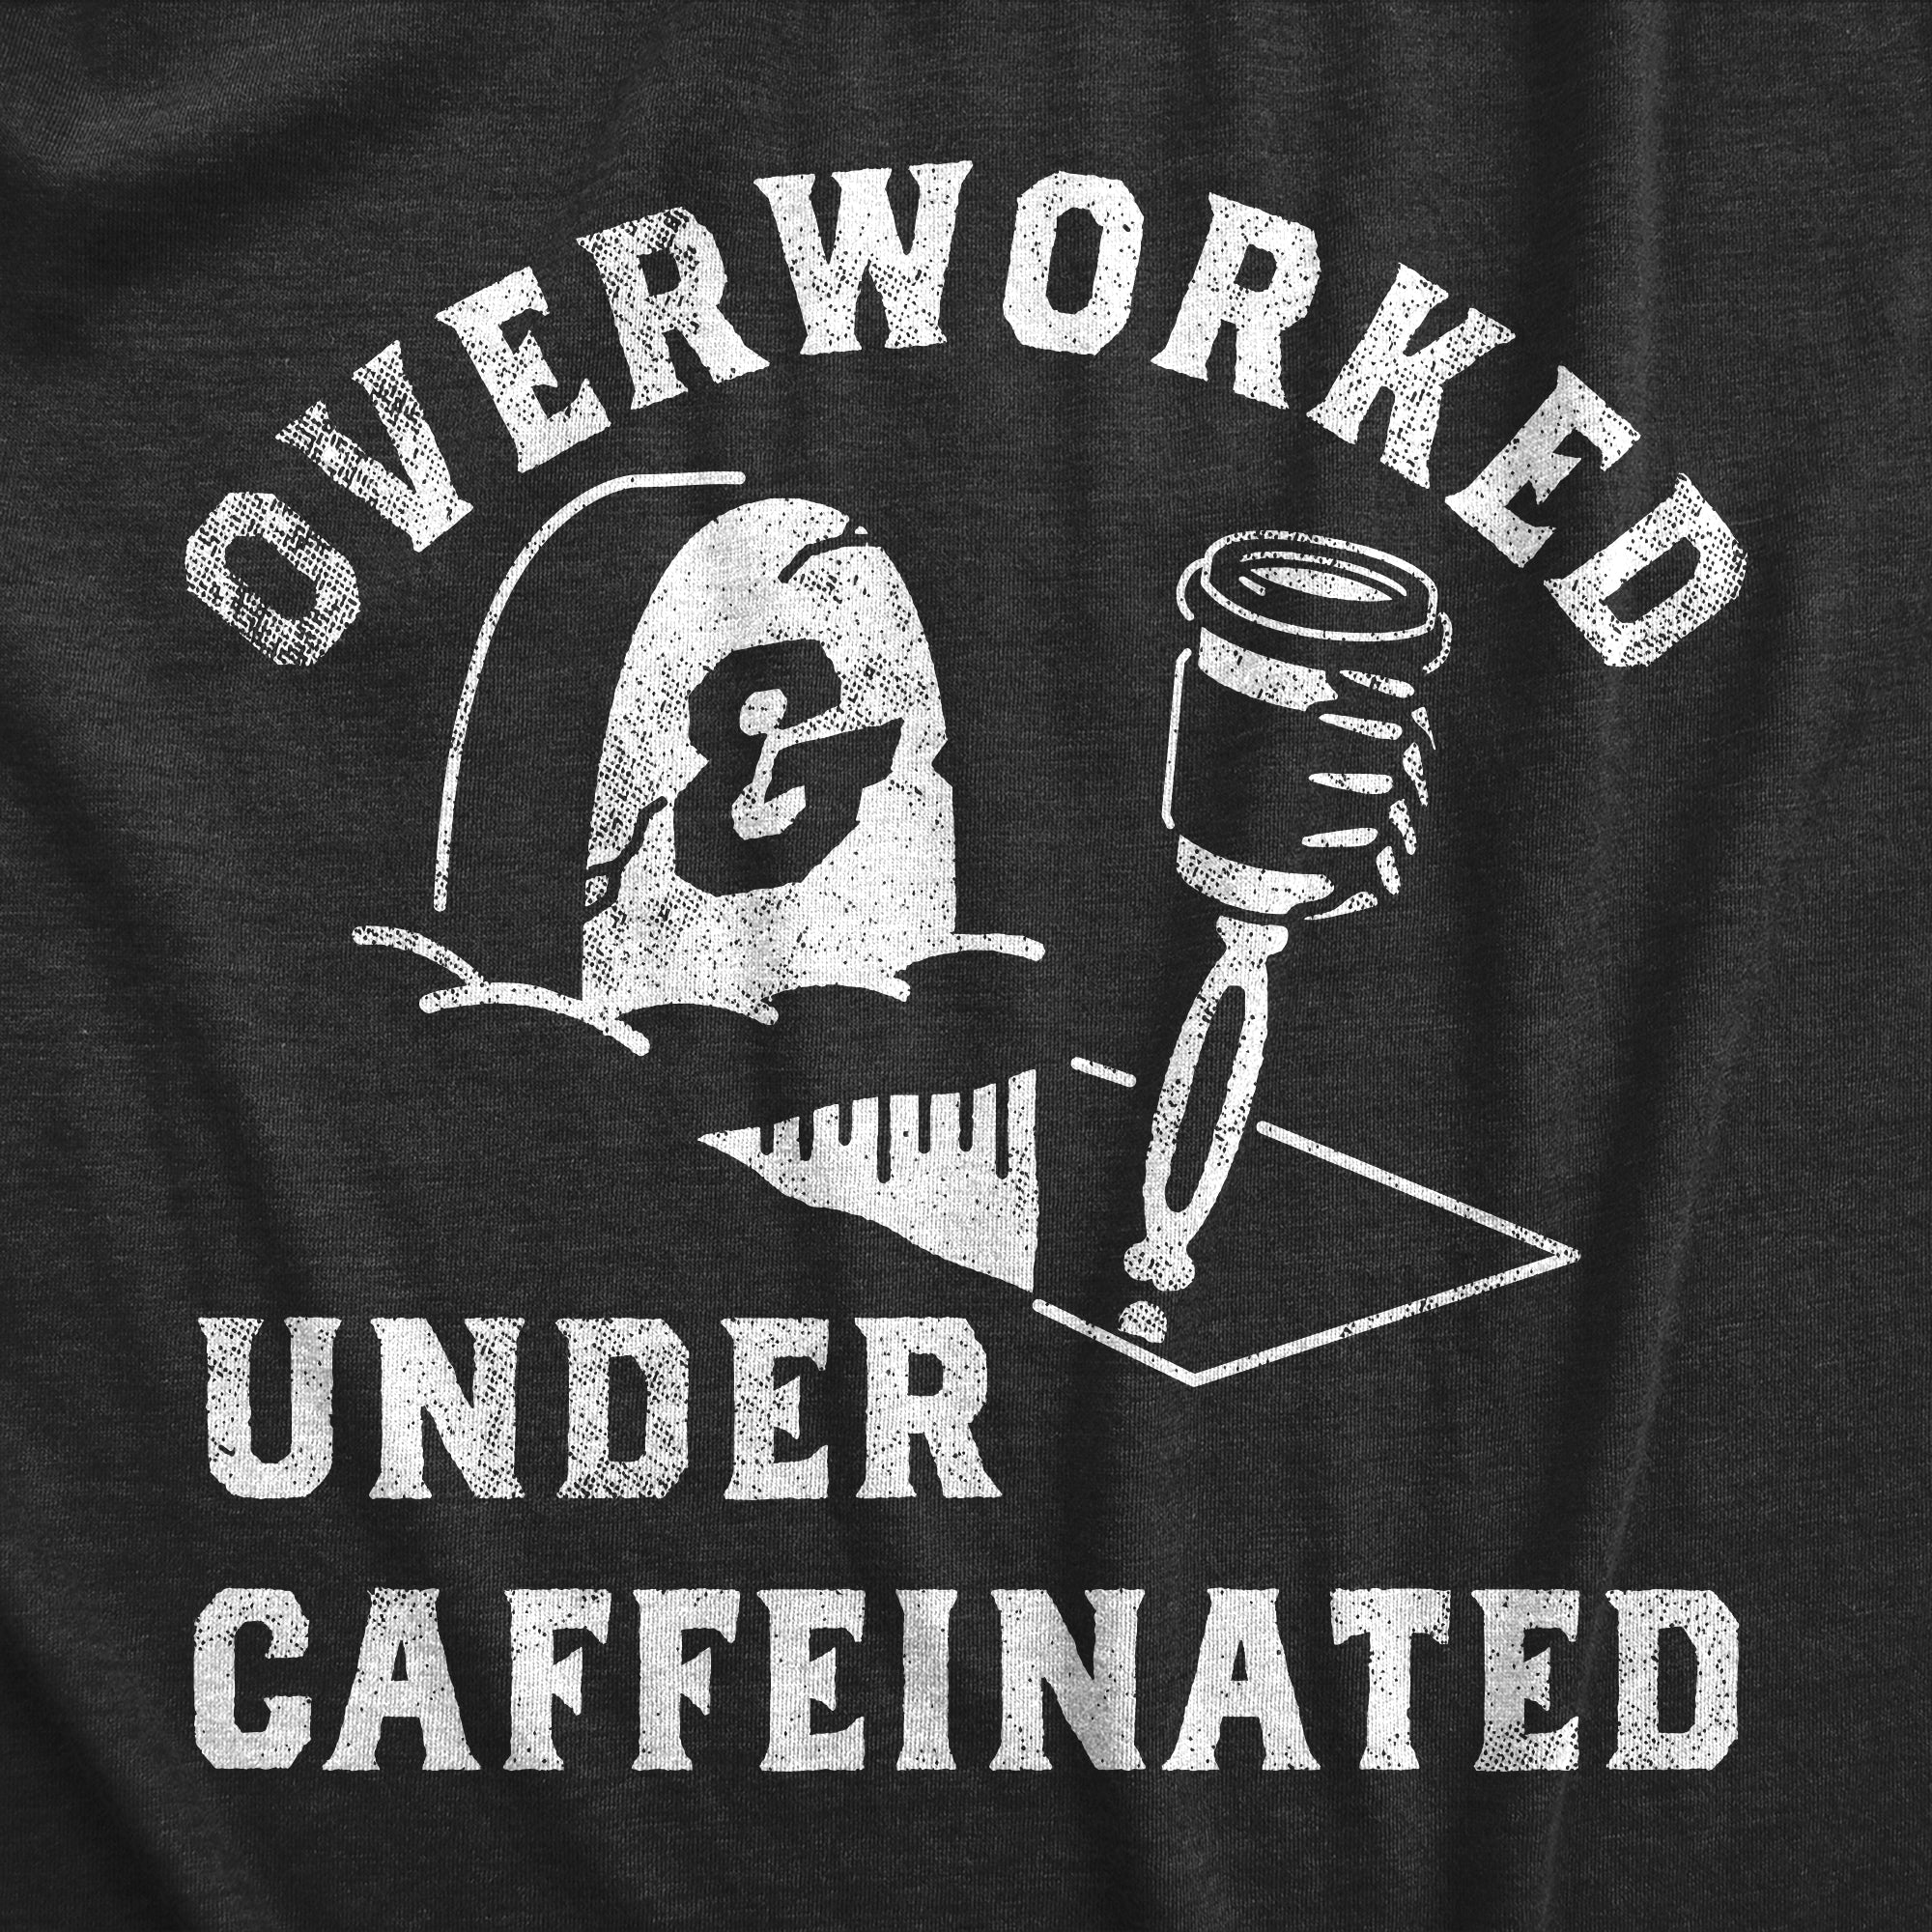 Funny Heather Black - OVERWORKED Overworked And Undercaffeinated Womens T Shirt Nerdy Coffee office Tee